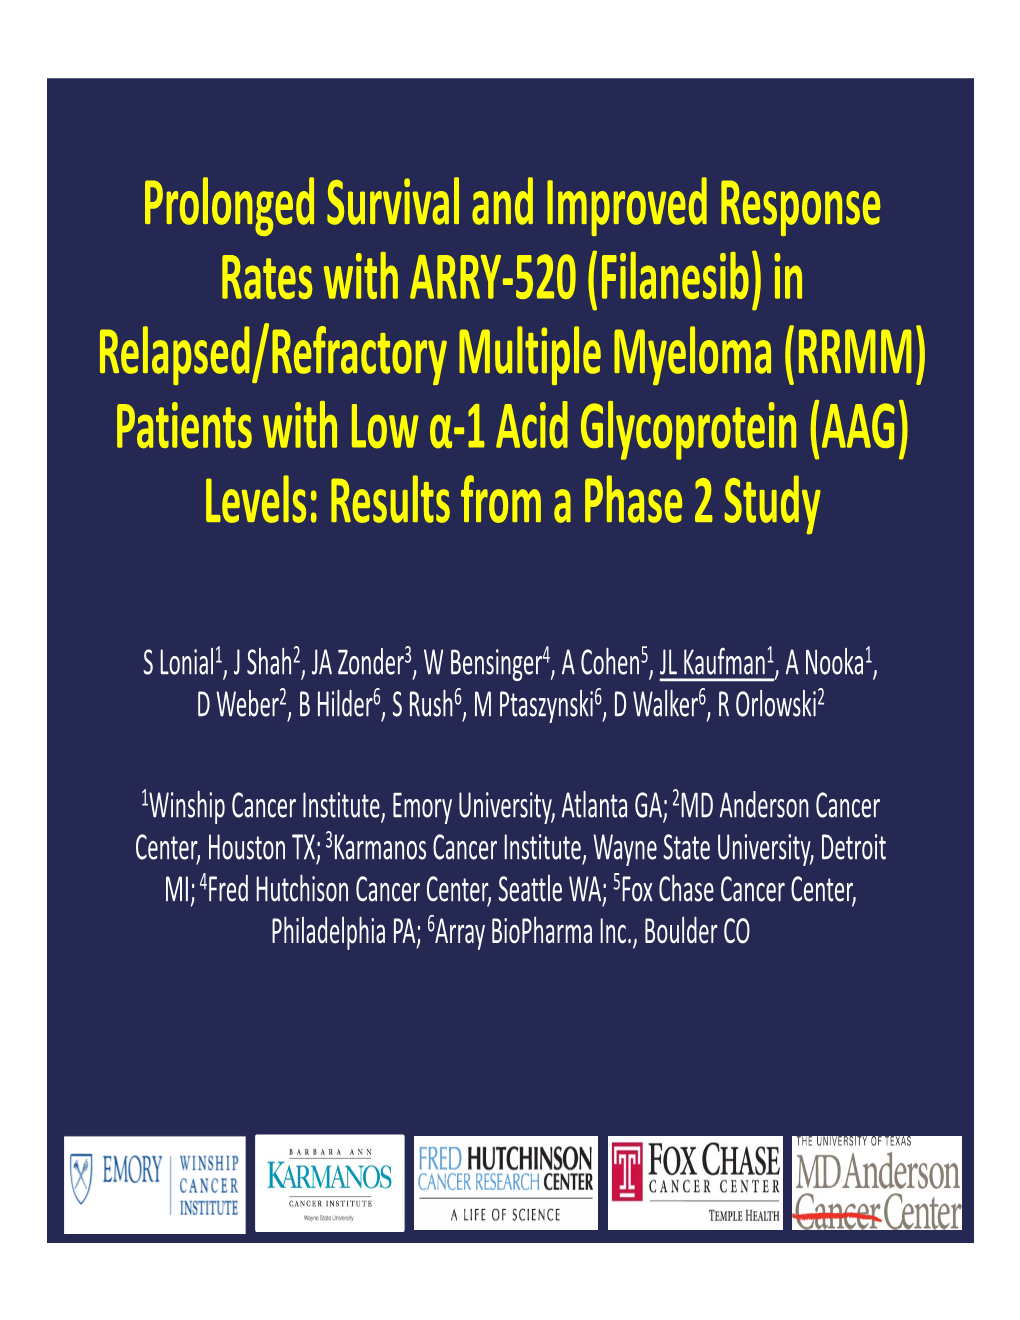 (Filanesib) in Relapsed/Refractory Multiple Myeloma (RRMM) Patients with Low Α‐1 Acid Glycoprotein (AAG) Levels: Results from a Phase 2 Study